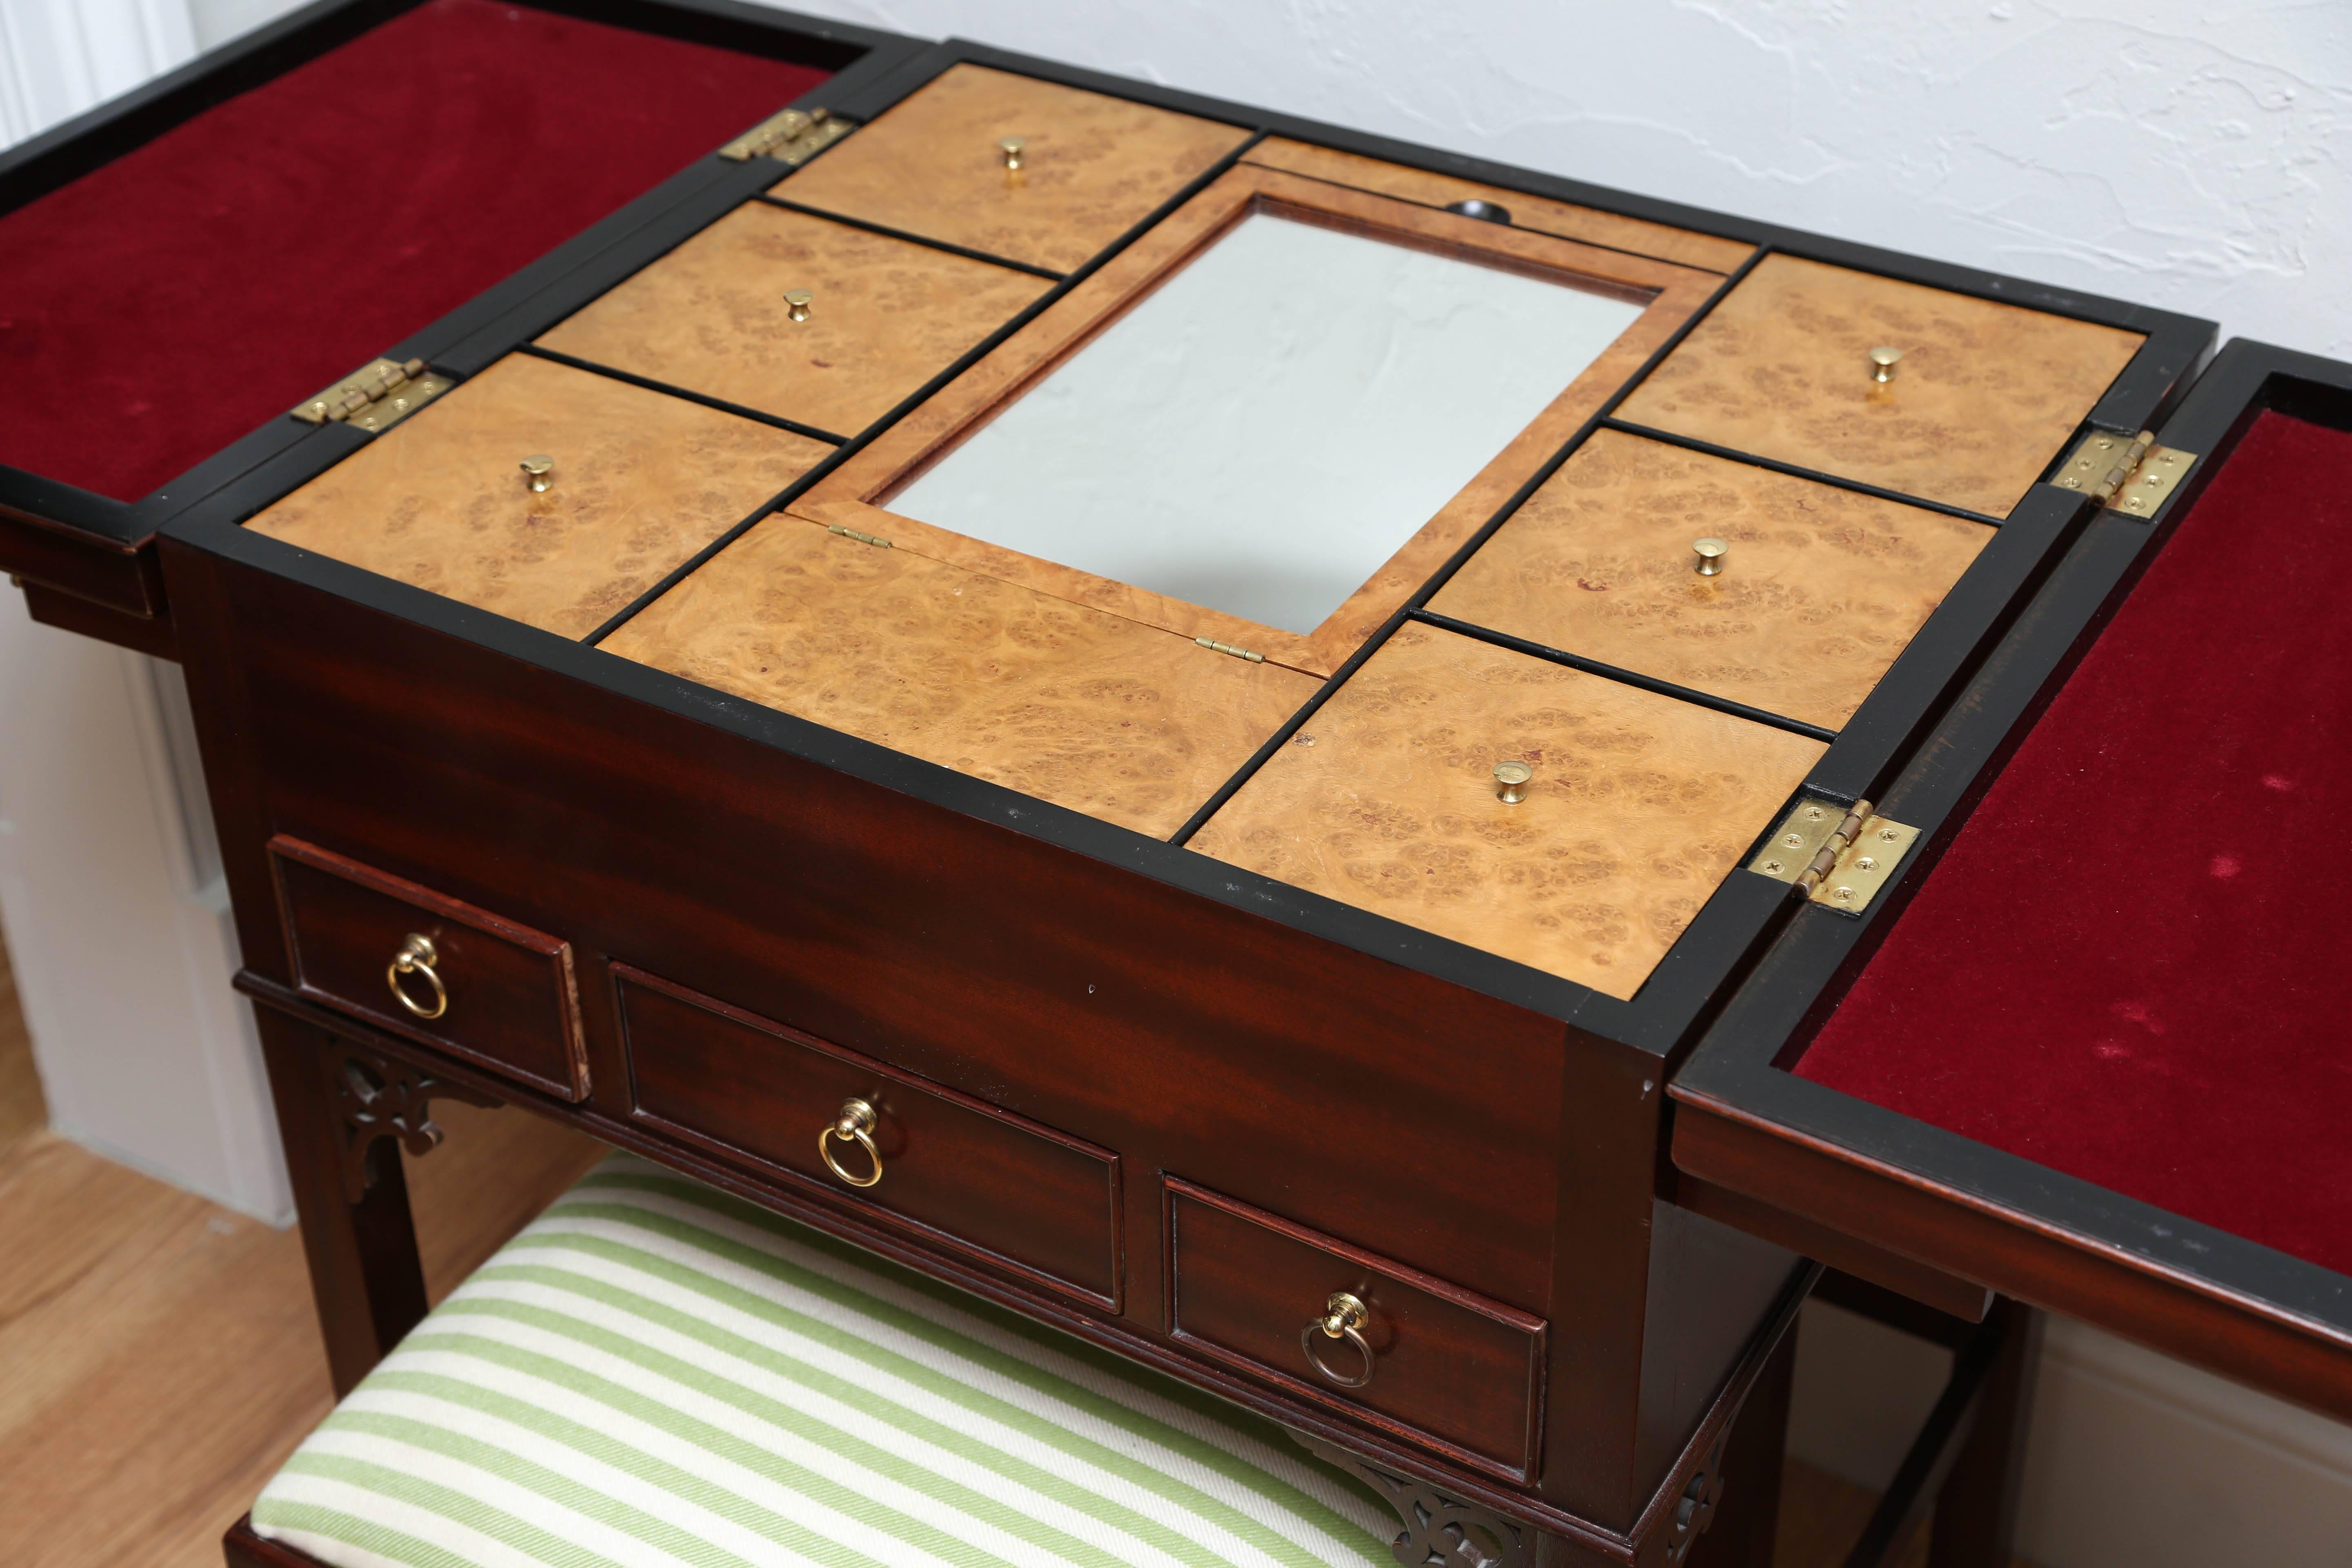 Very unusual vanity/jewelry chest with built in storage compartments and hidden mirror by Baker Furniture Co. Accompanied by matching vanity stool.
This piece is 46.5 with both sides opened.